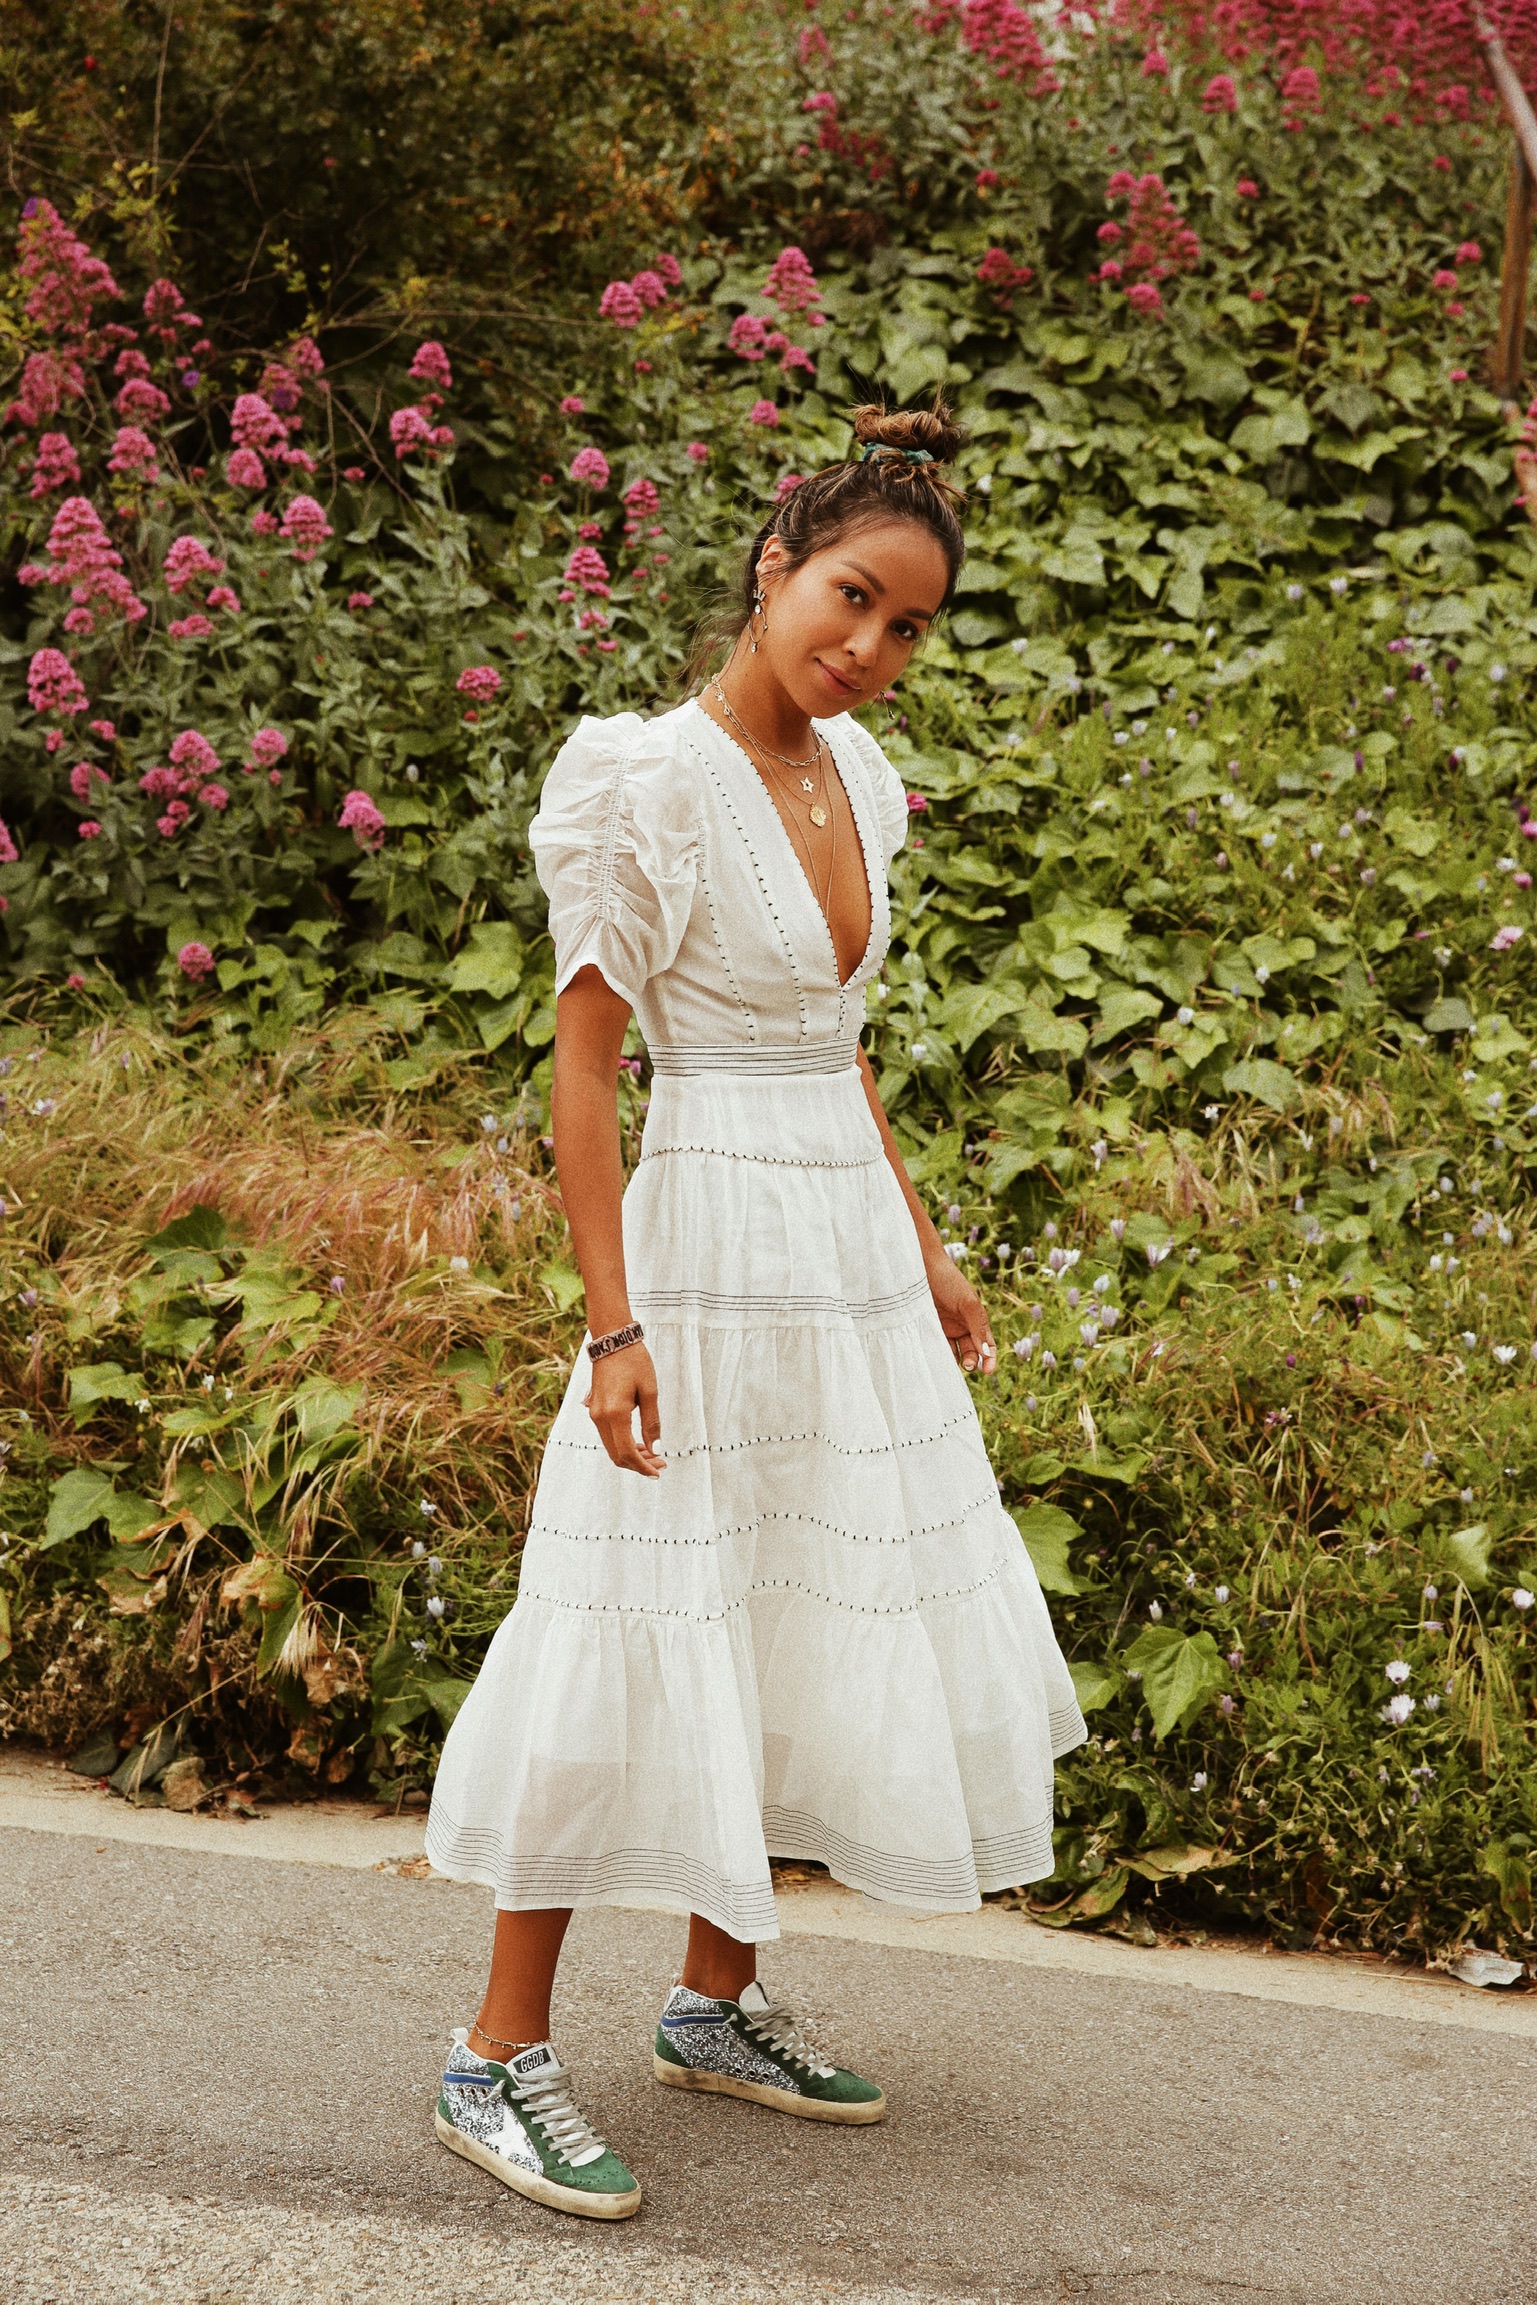 Find the perfect White Dress! – Sincerely Jules